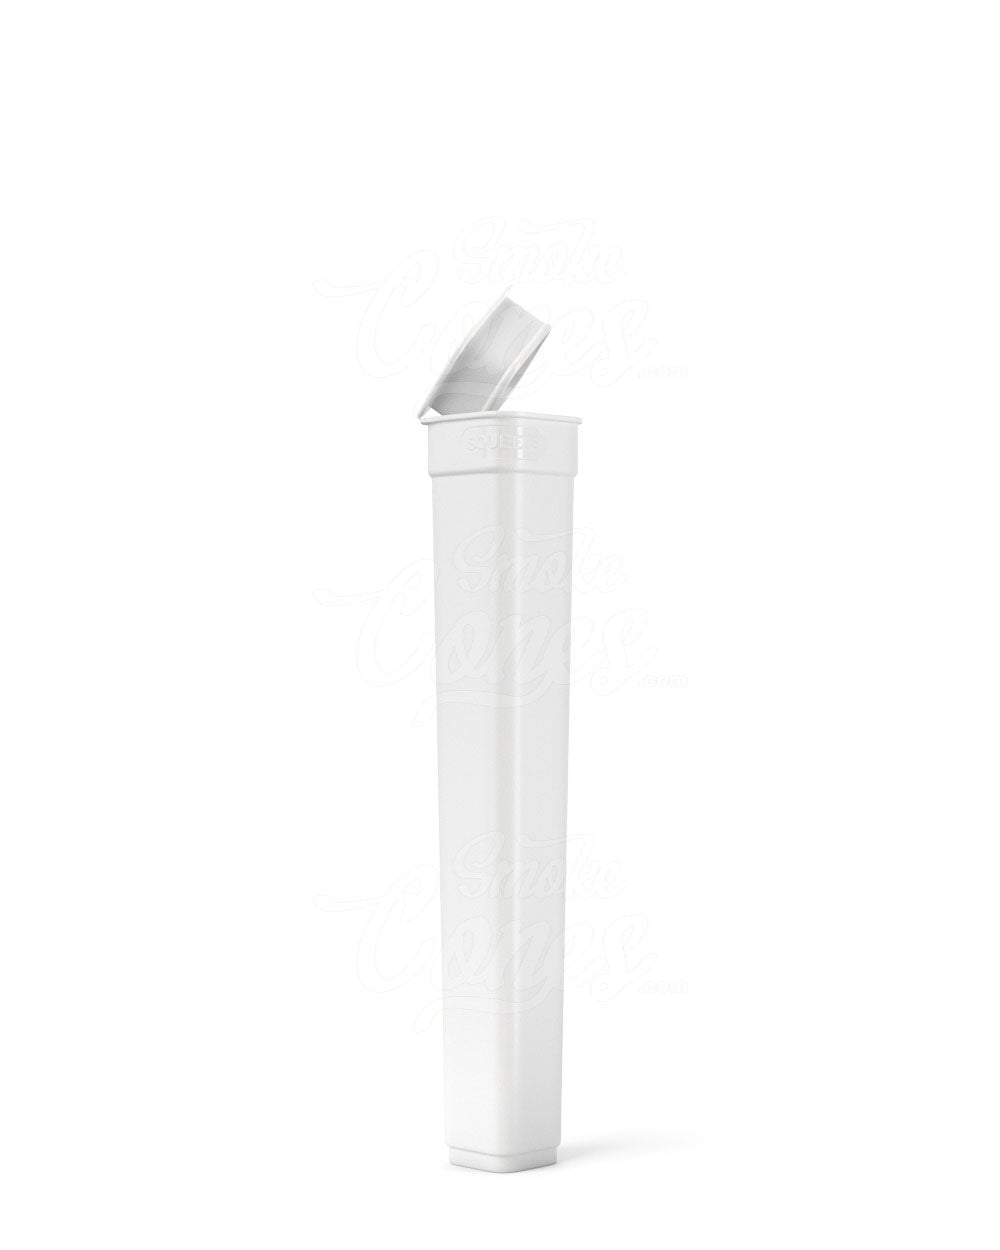 119mm Child Resistant King Size Sustainable Pop Box Pop Top White Plastic Pre-Roll Tubes 1840/Box